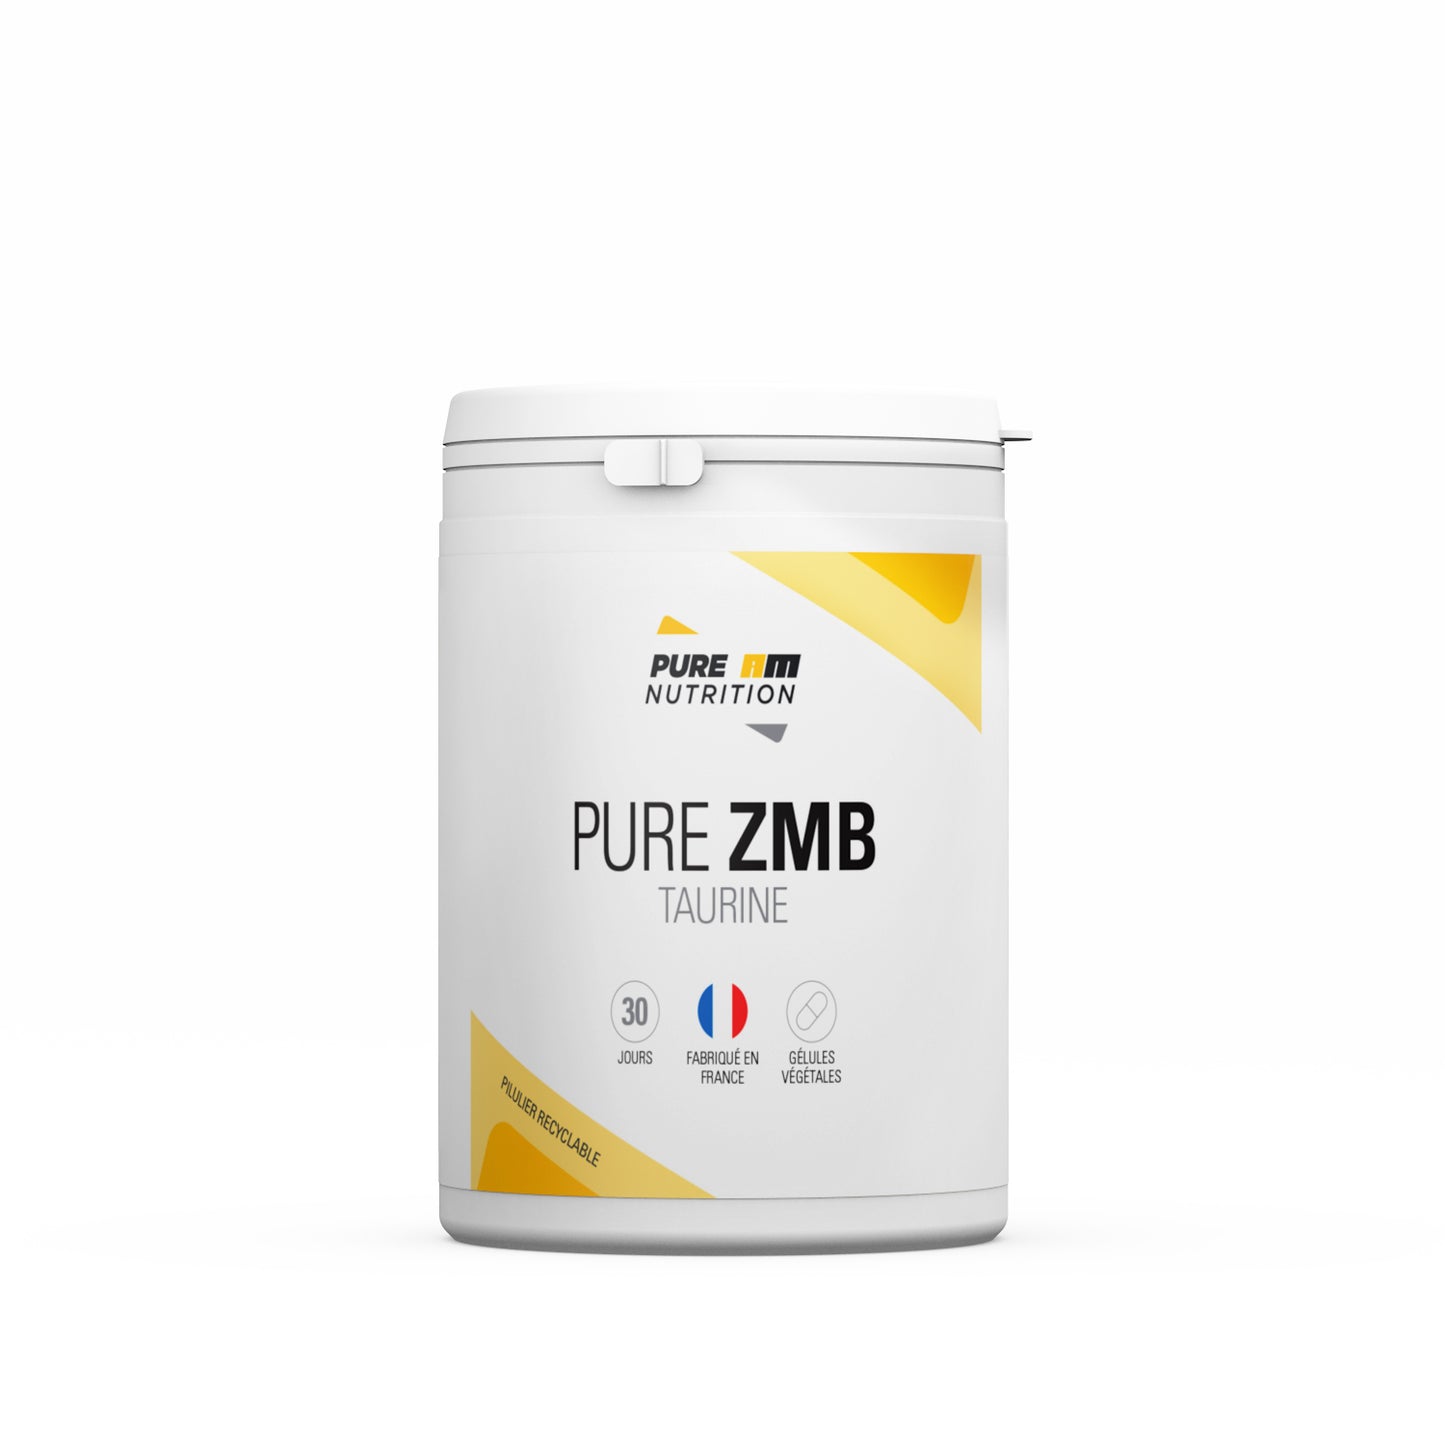 ZMB PURE AM Nutrition